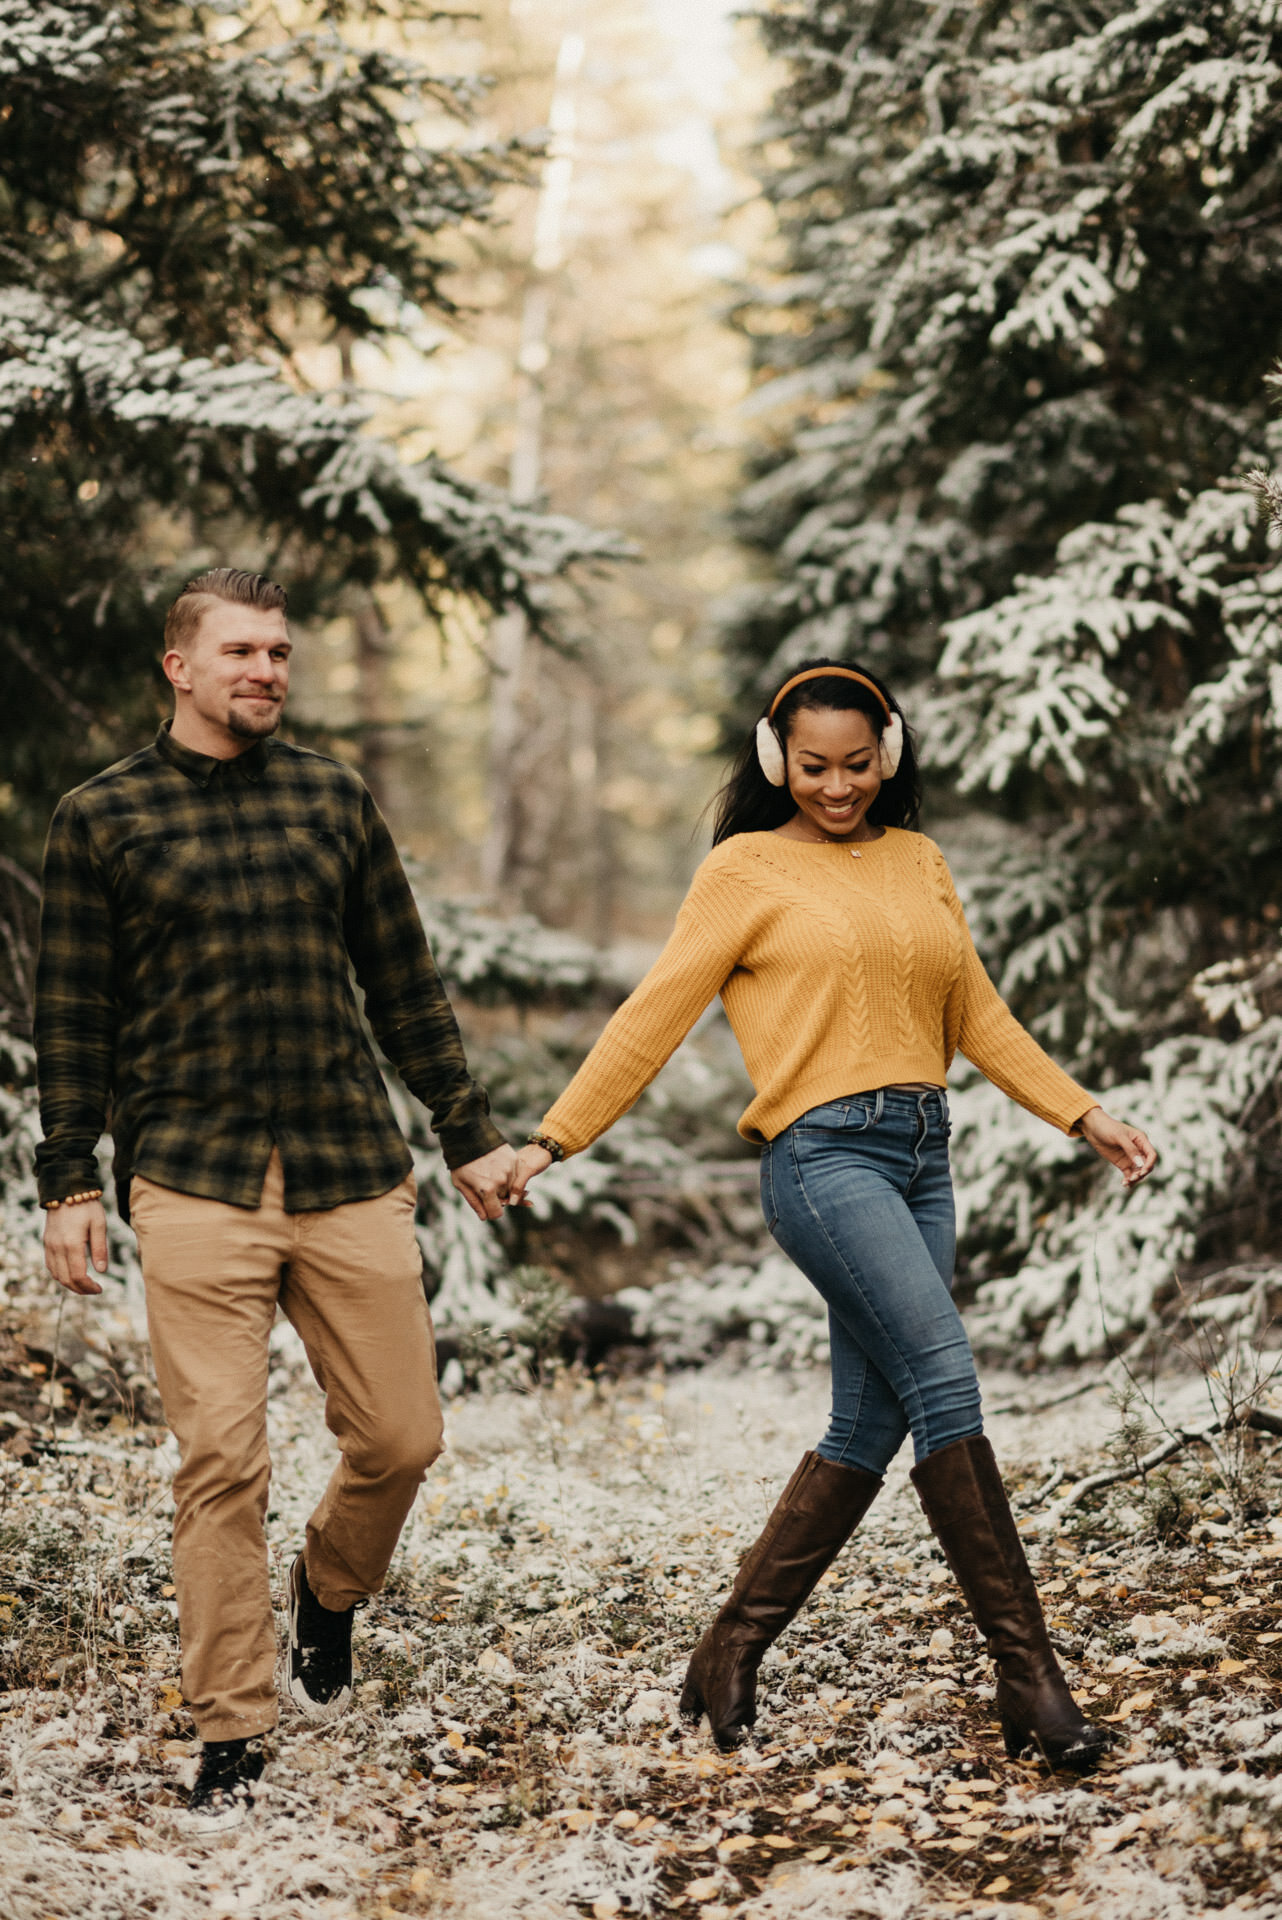 kelsey-rob-snowy-fall-leaves-evergreen-colorado-engagement-session-20.jpg